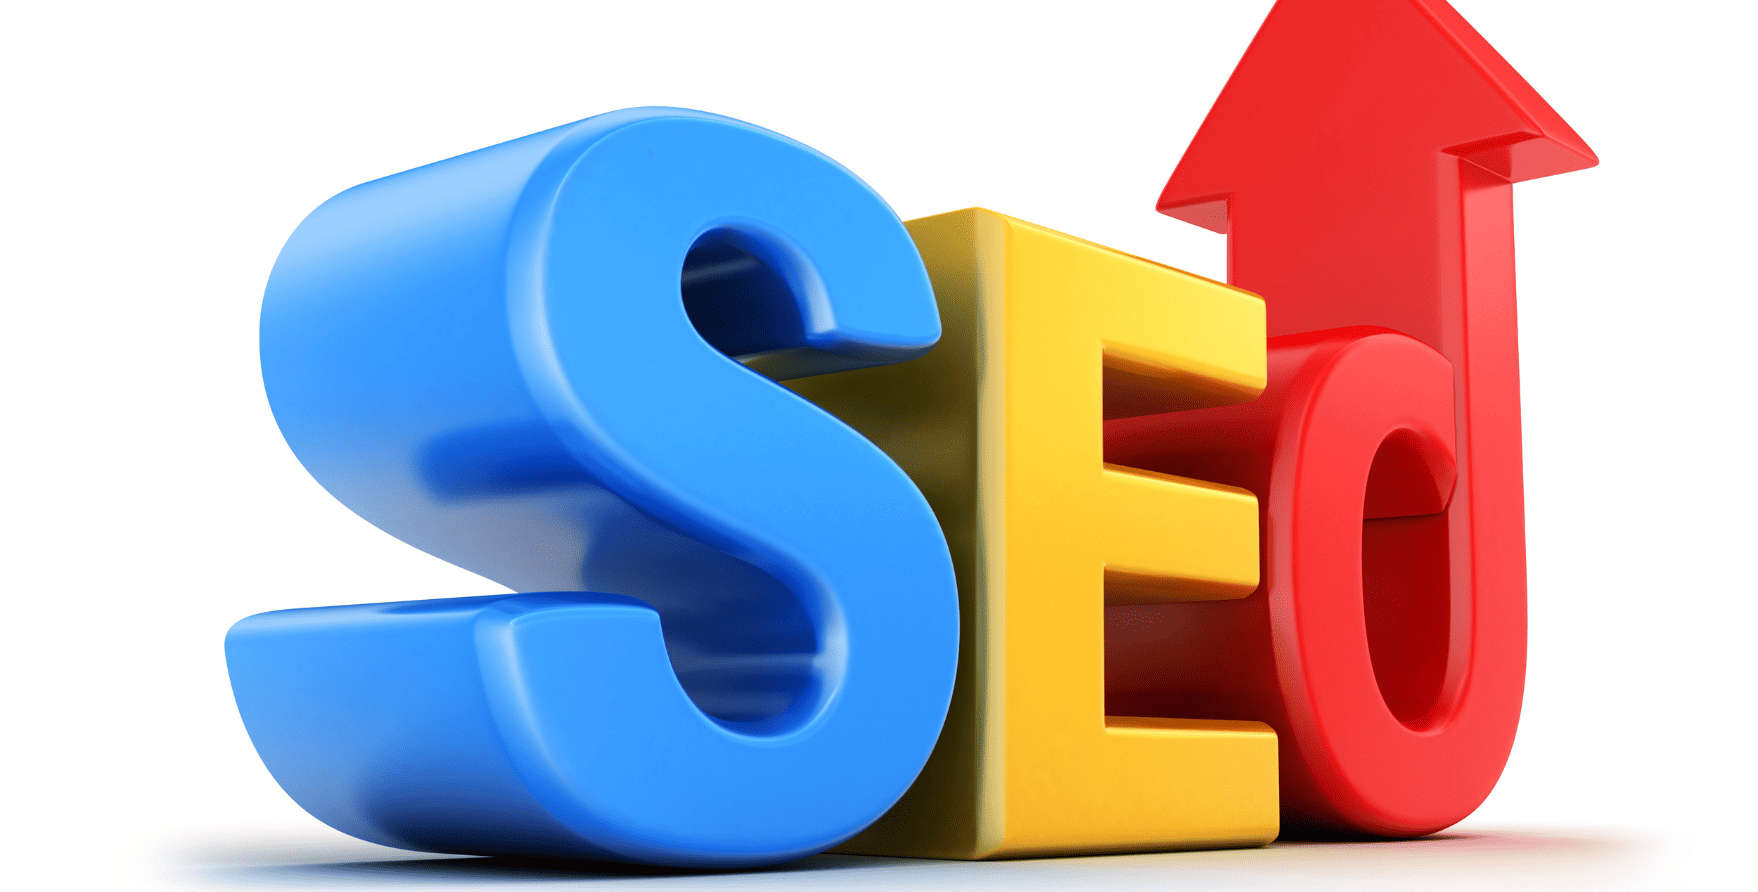 SLL certificate helps in increasing your website ranking through SEO